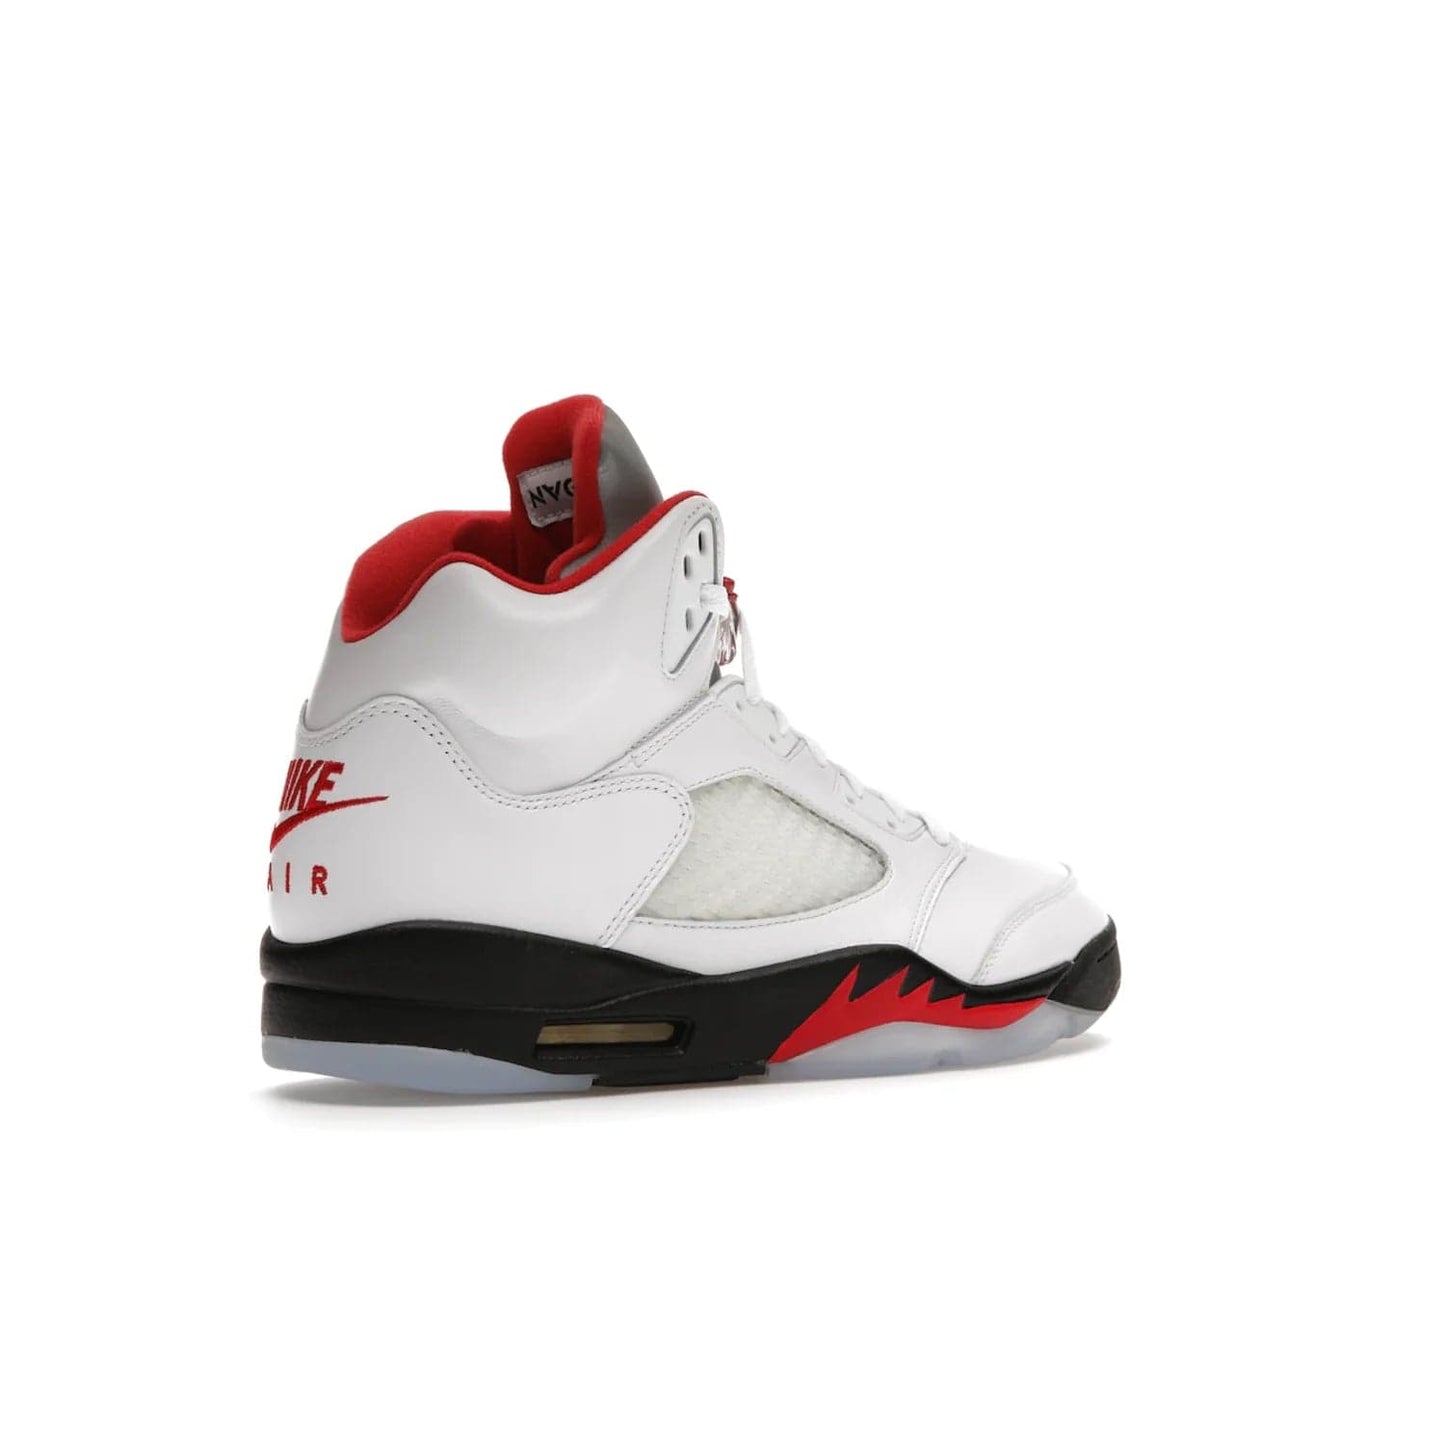 Jordan 5 Retro Fire Red Silver Tongue (2020) - Image 33 - Only at www.BallersClubKickz.com - Experience classic styling with the Jordan 5 Retro Fire Red Silver Tongue (2020). Features a white leather upper, 3M reflective tongue, midsole colorblocking, and an icy translucent outsole. Now available, upgrade your shoe collection today.